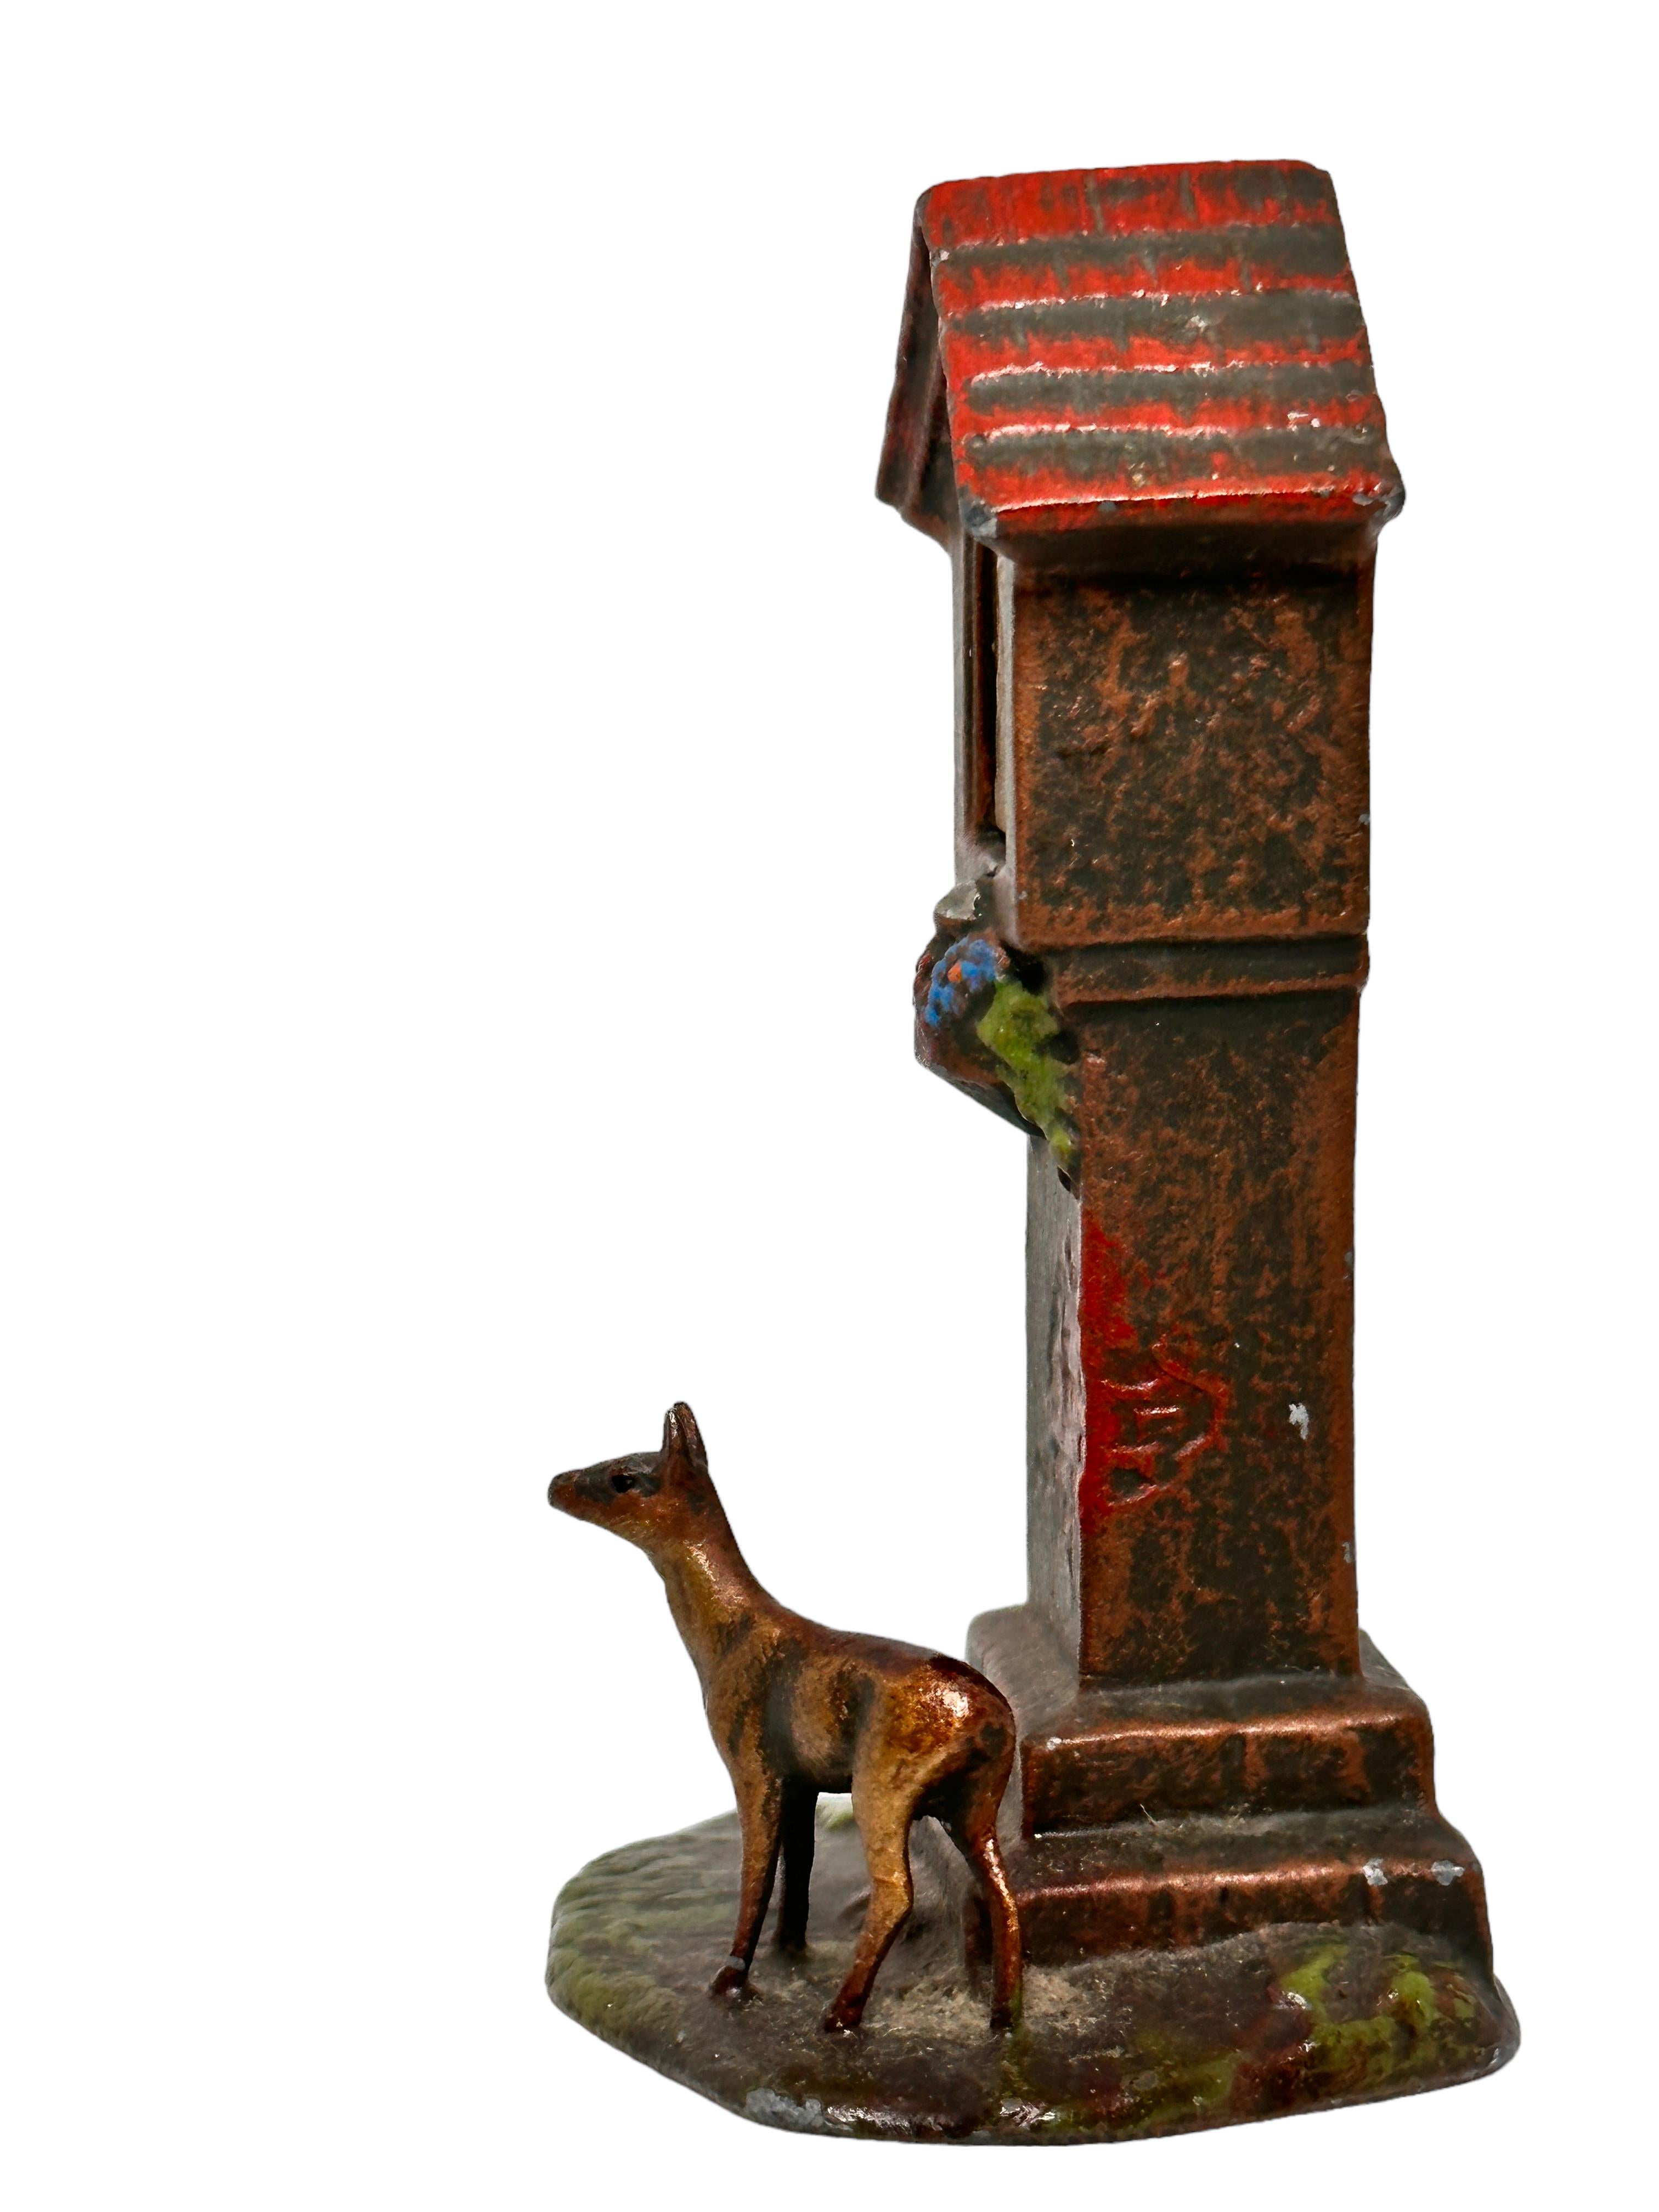 Old Marterl, miniature wayside cross with Madonna/Mother of God, deer, hand-painted with cold paint, like the well-known Viennese bronze figures, made of metal, religious decoration with image of a saint and animal figure. A nice addition to any